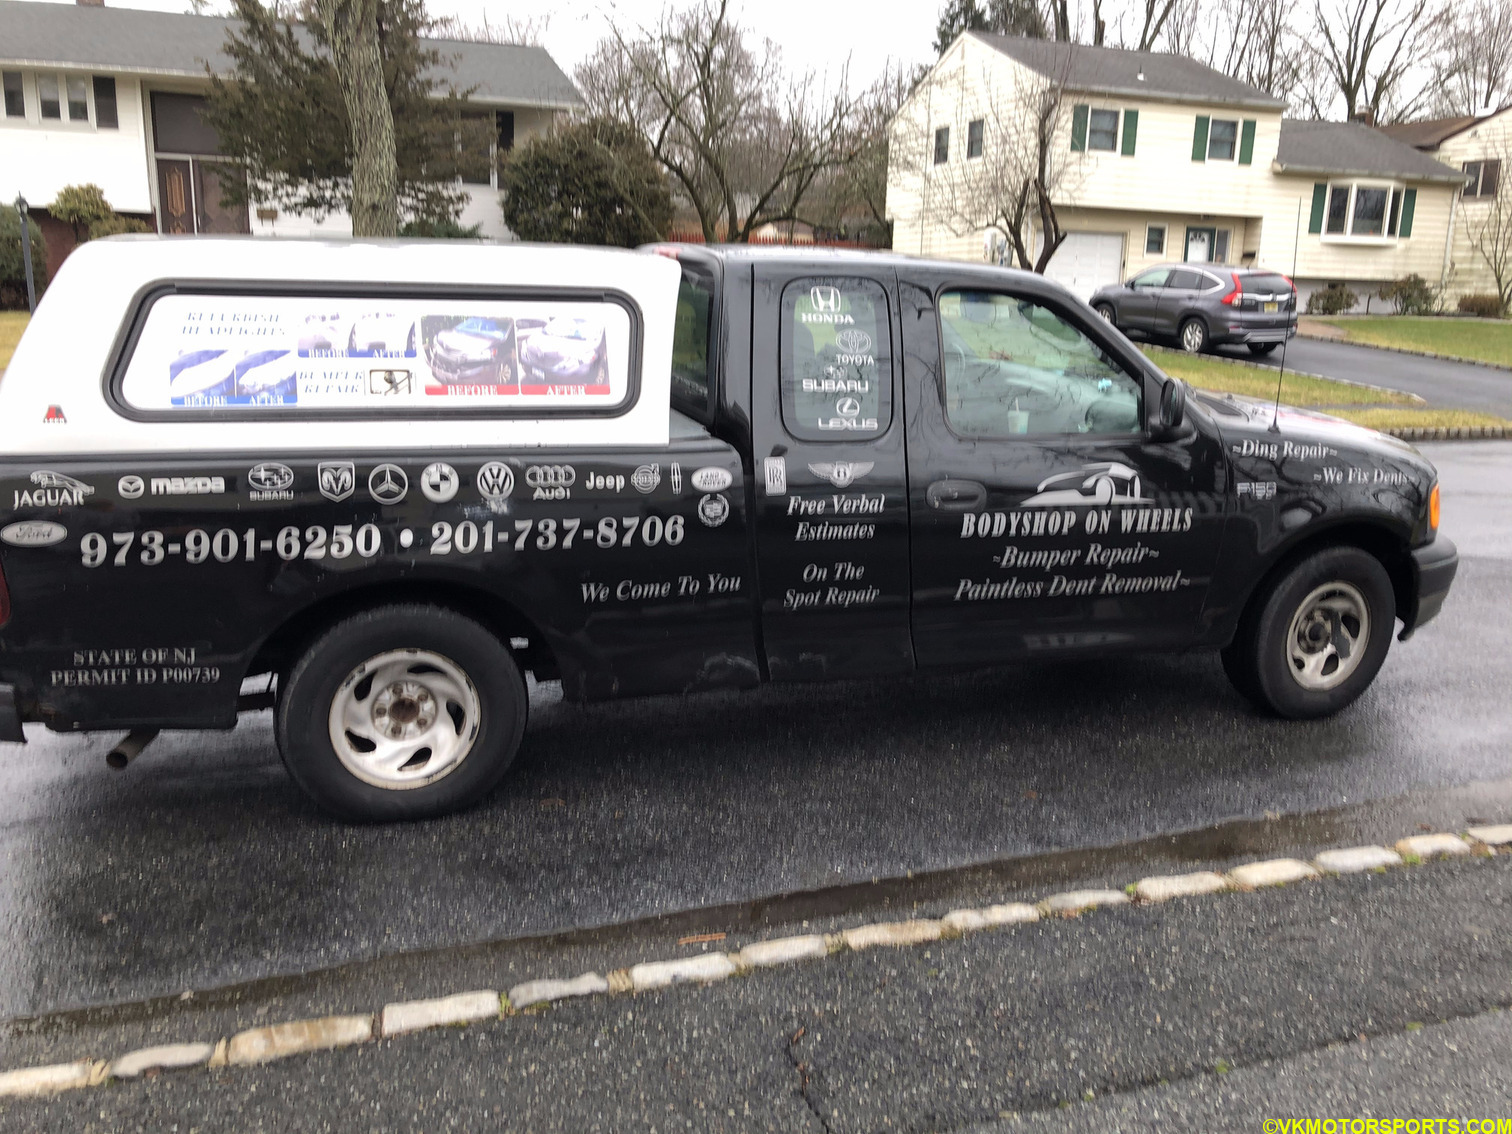 Figure 17. Hired a mobile body shop